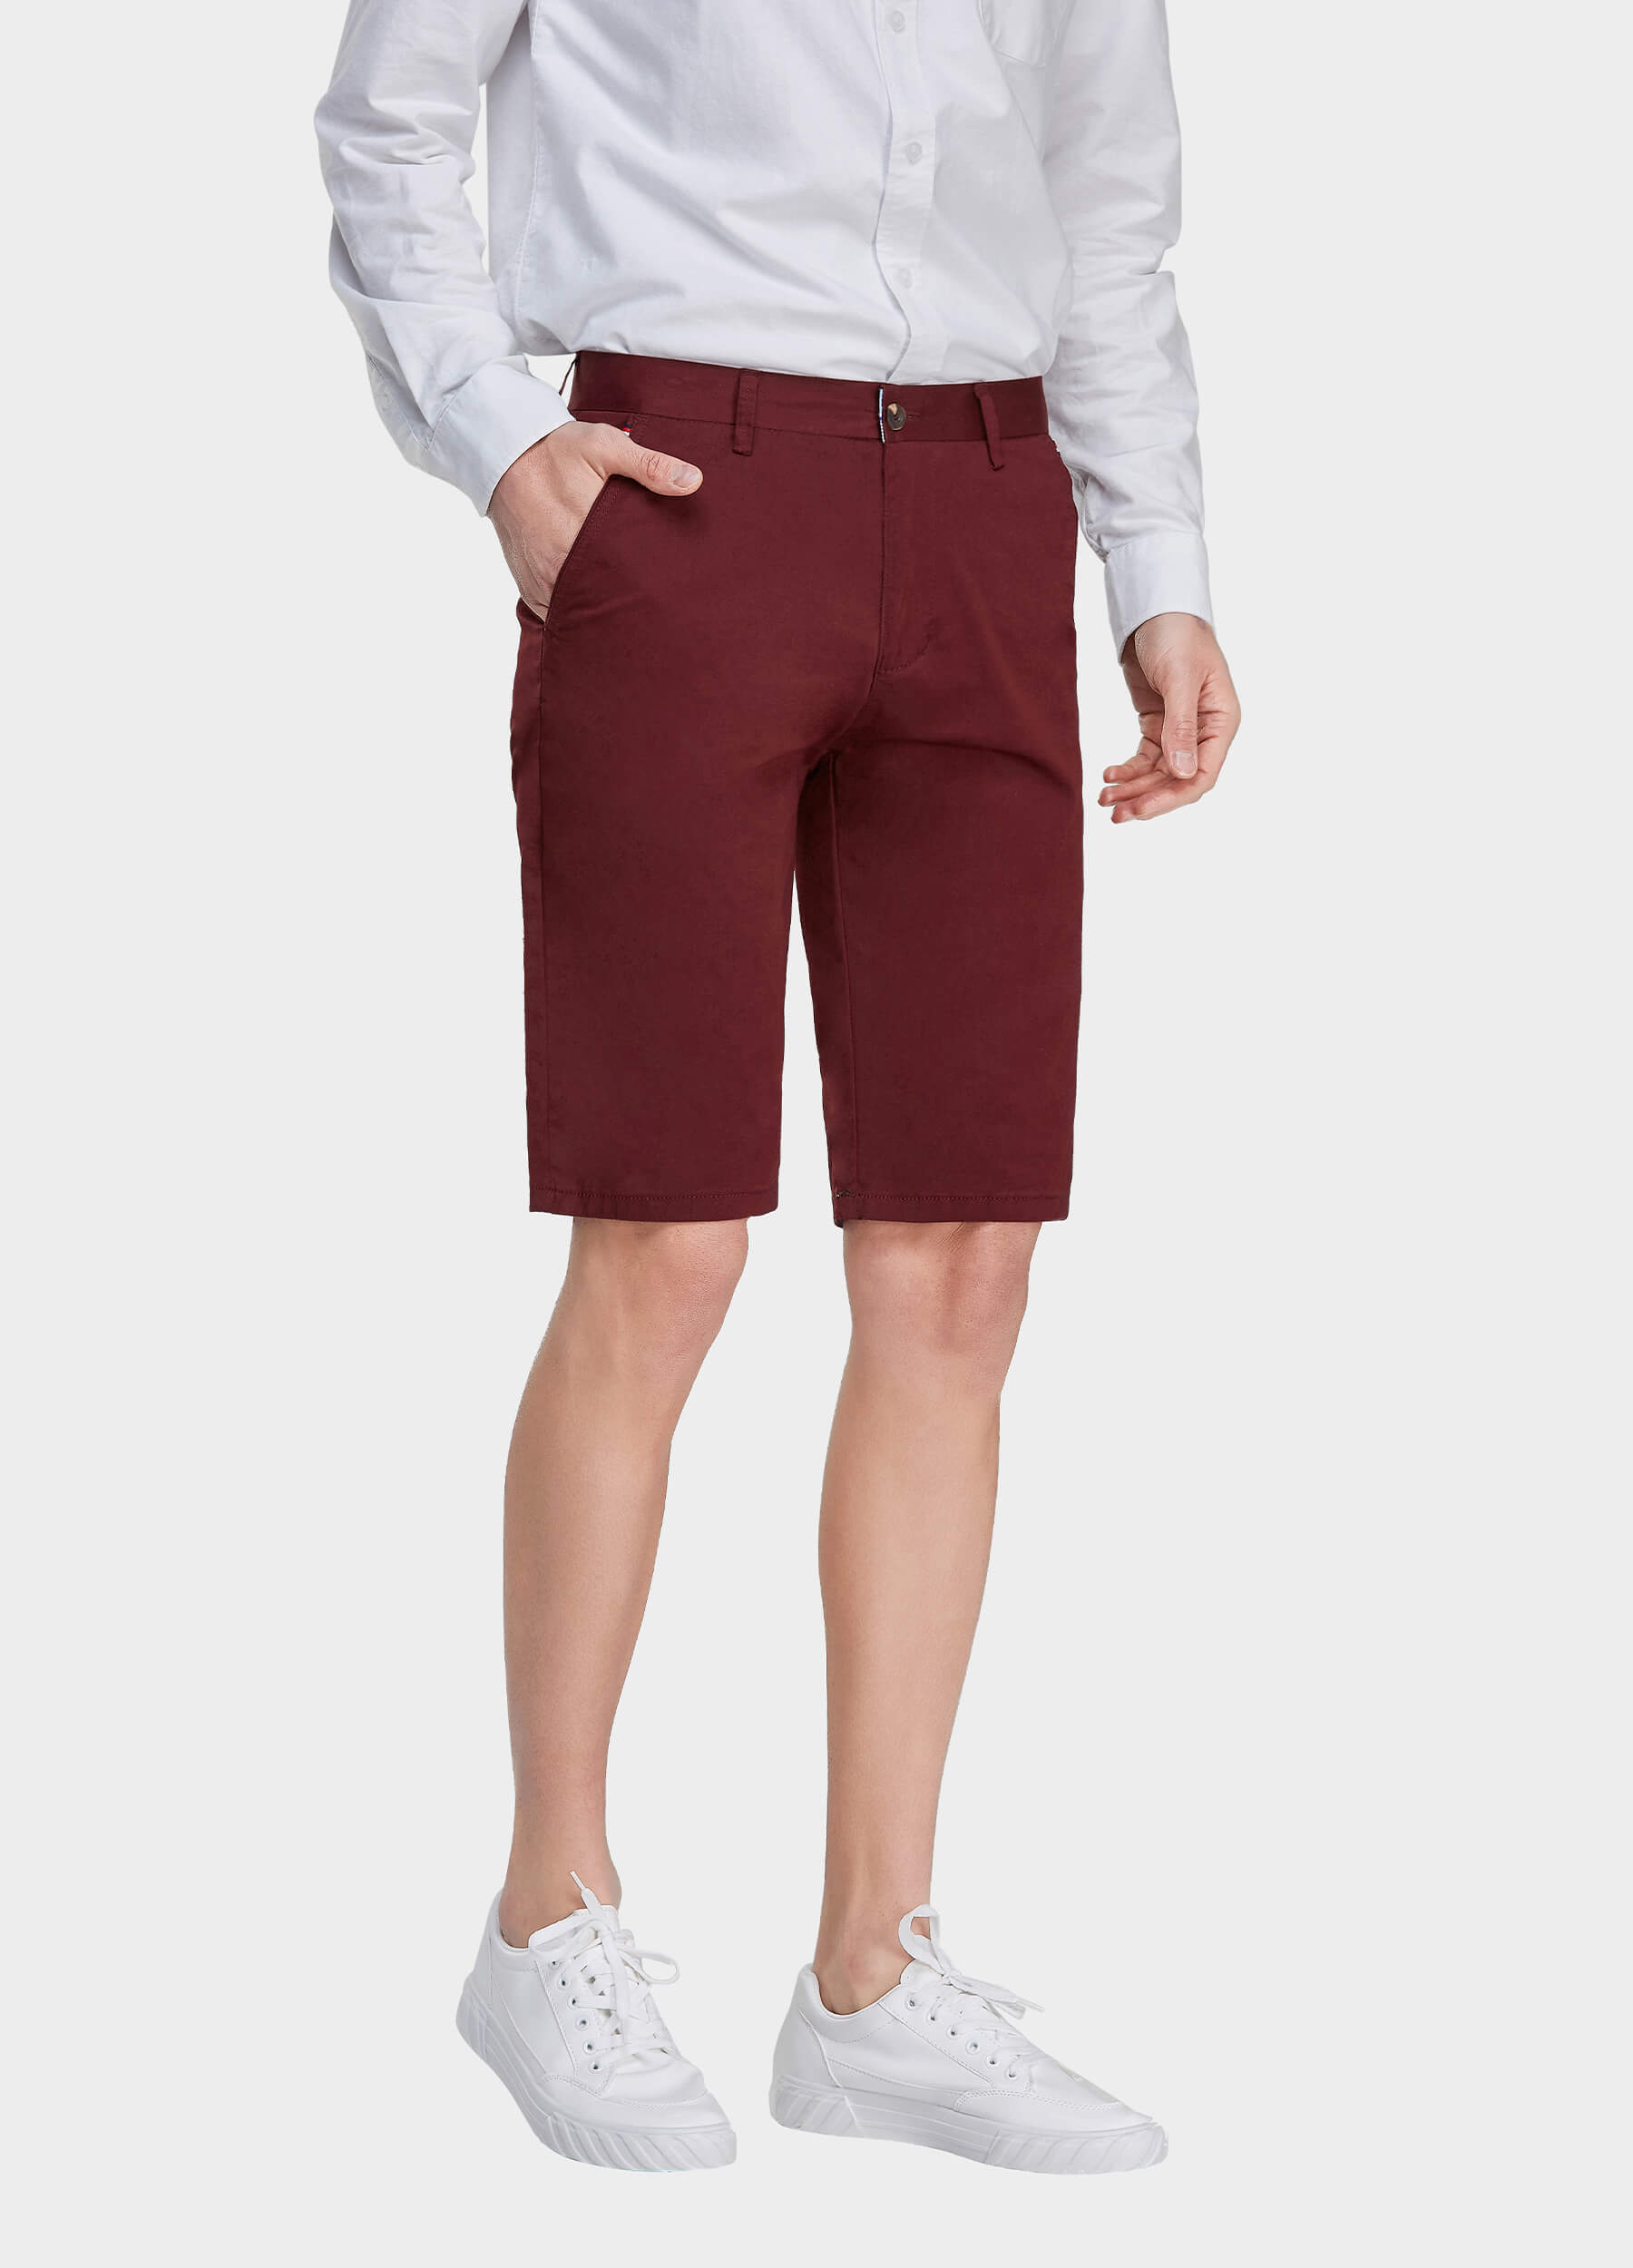 Men's Casual Button Closure Zipper Elasticity Solid Shorts with Slant Pocket-Wine Red